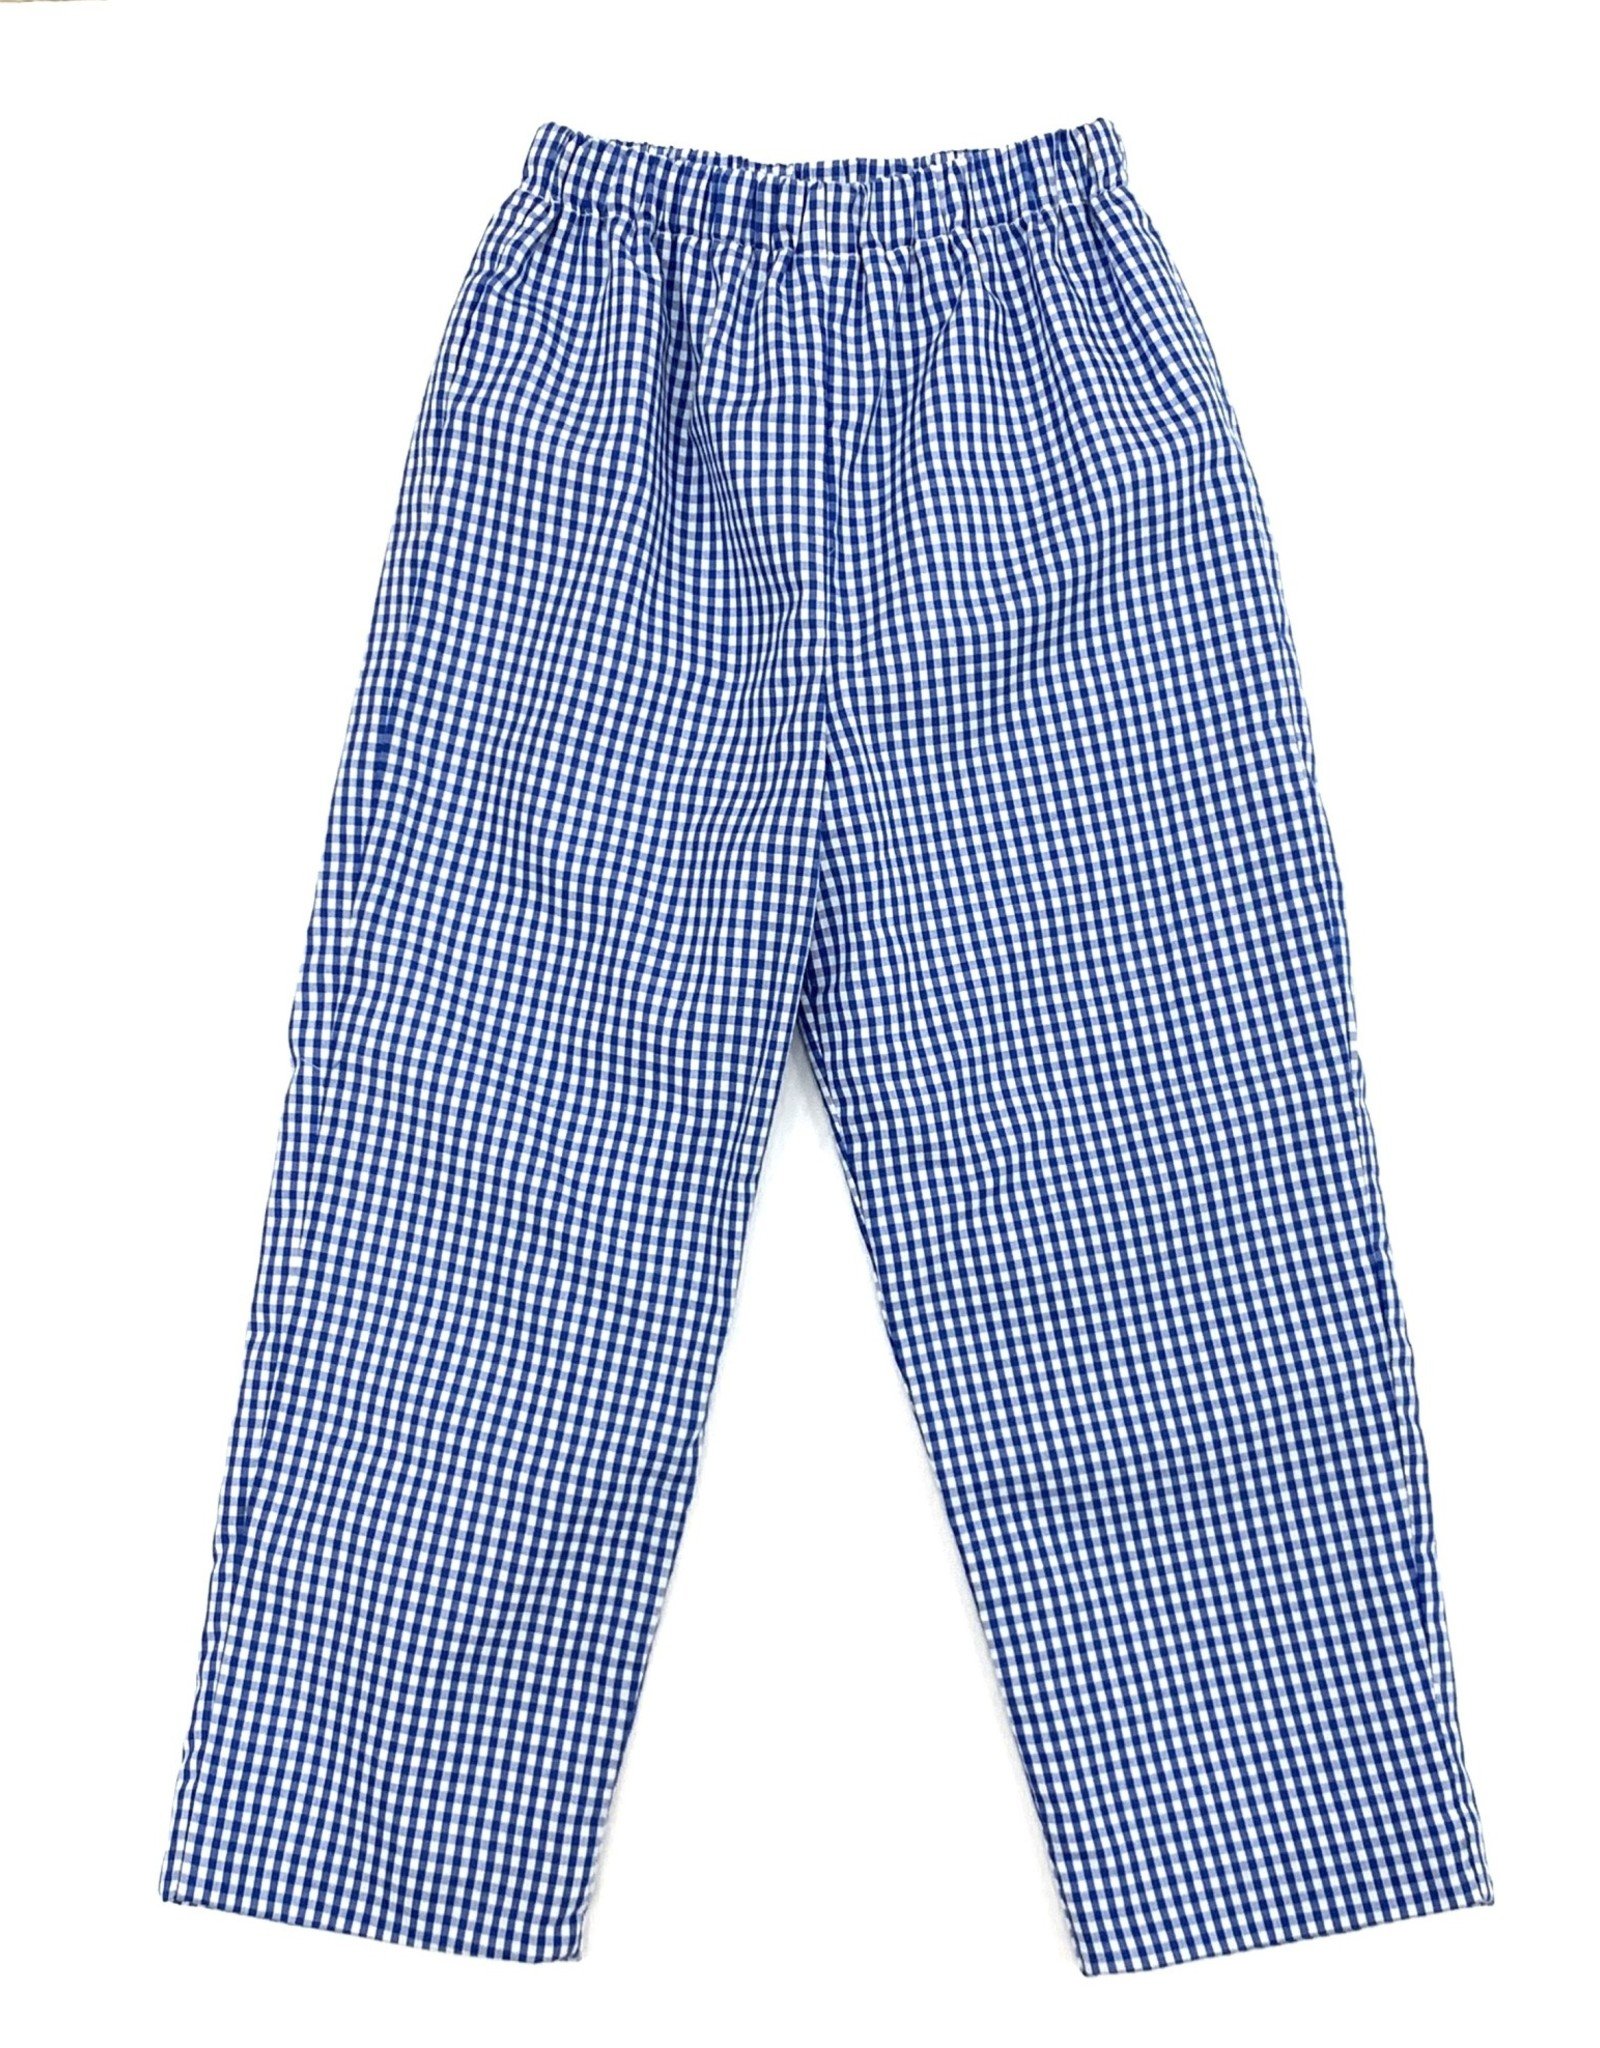 Claire and Charlie Wizard of Oz Royal Blue Check Pants